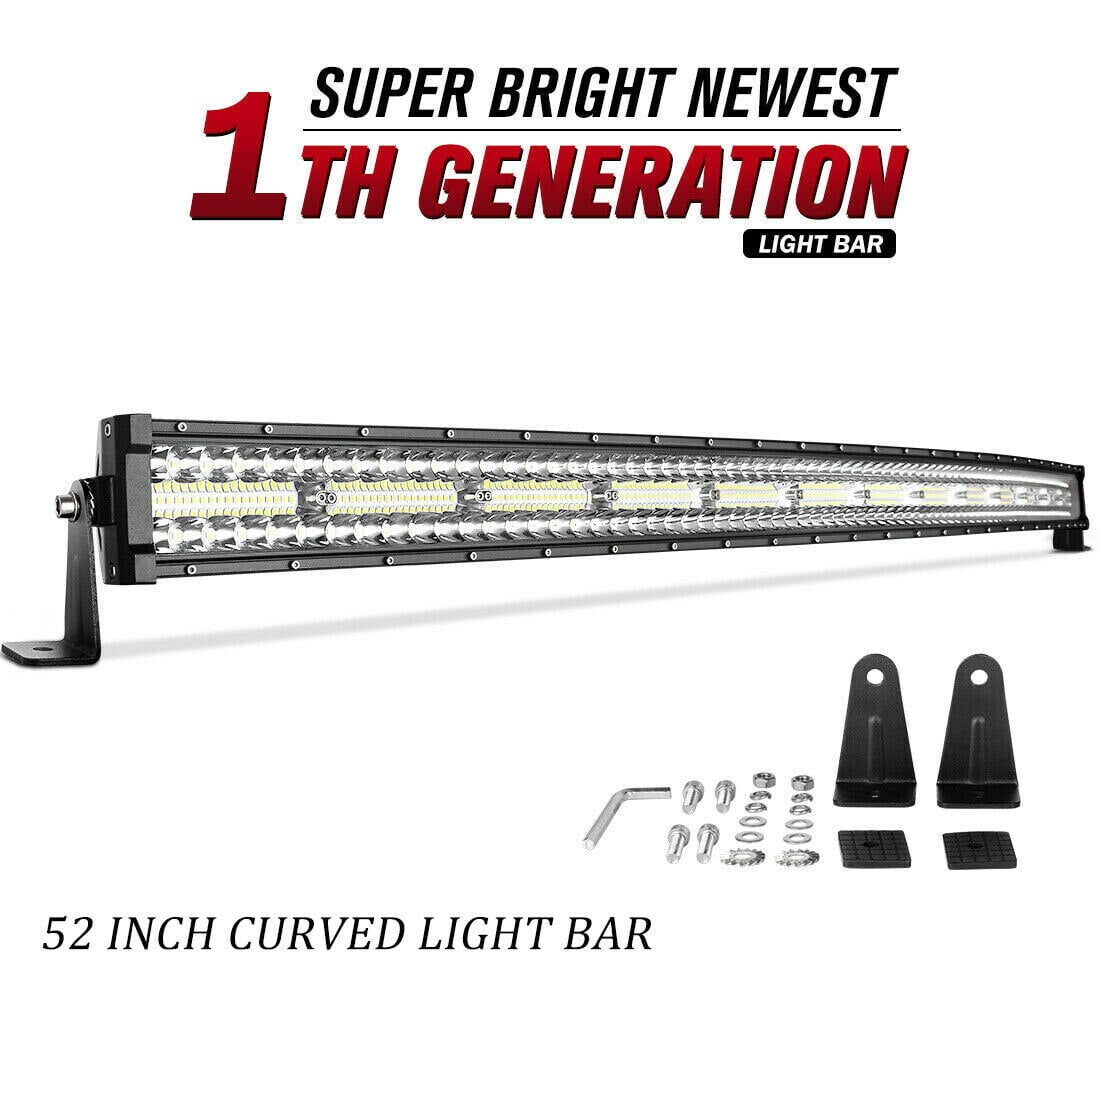 52INCH 700W Curved LED Light Bar Spot Flood Combo Wiring For Jeep Offroad 4X4WD